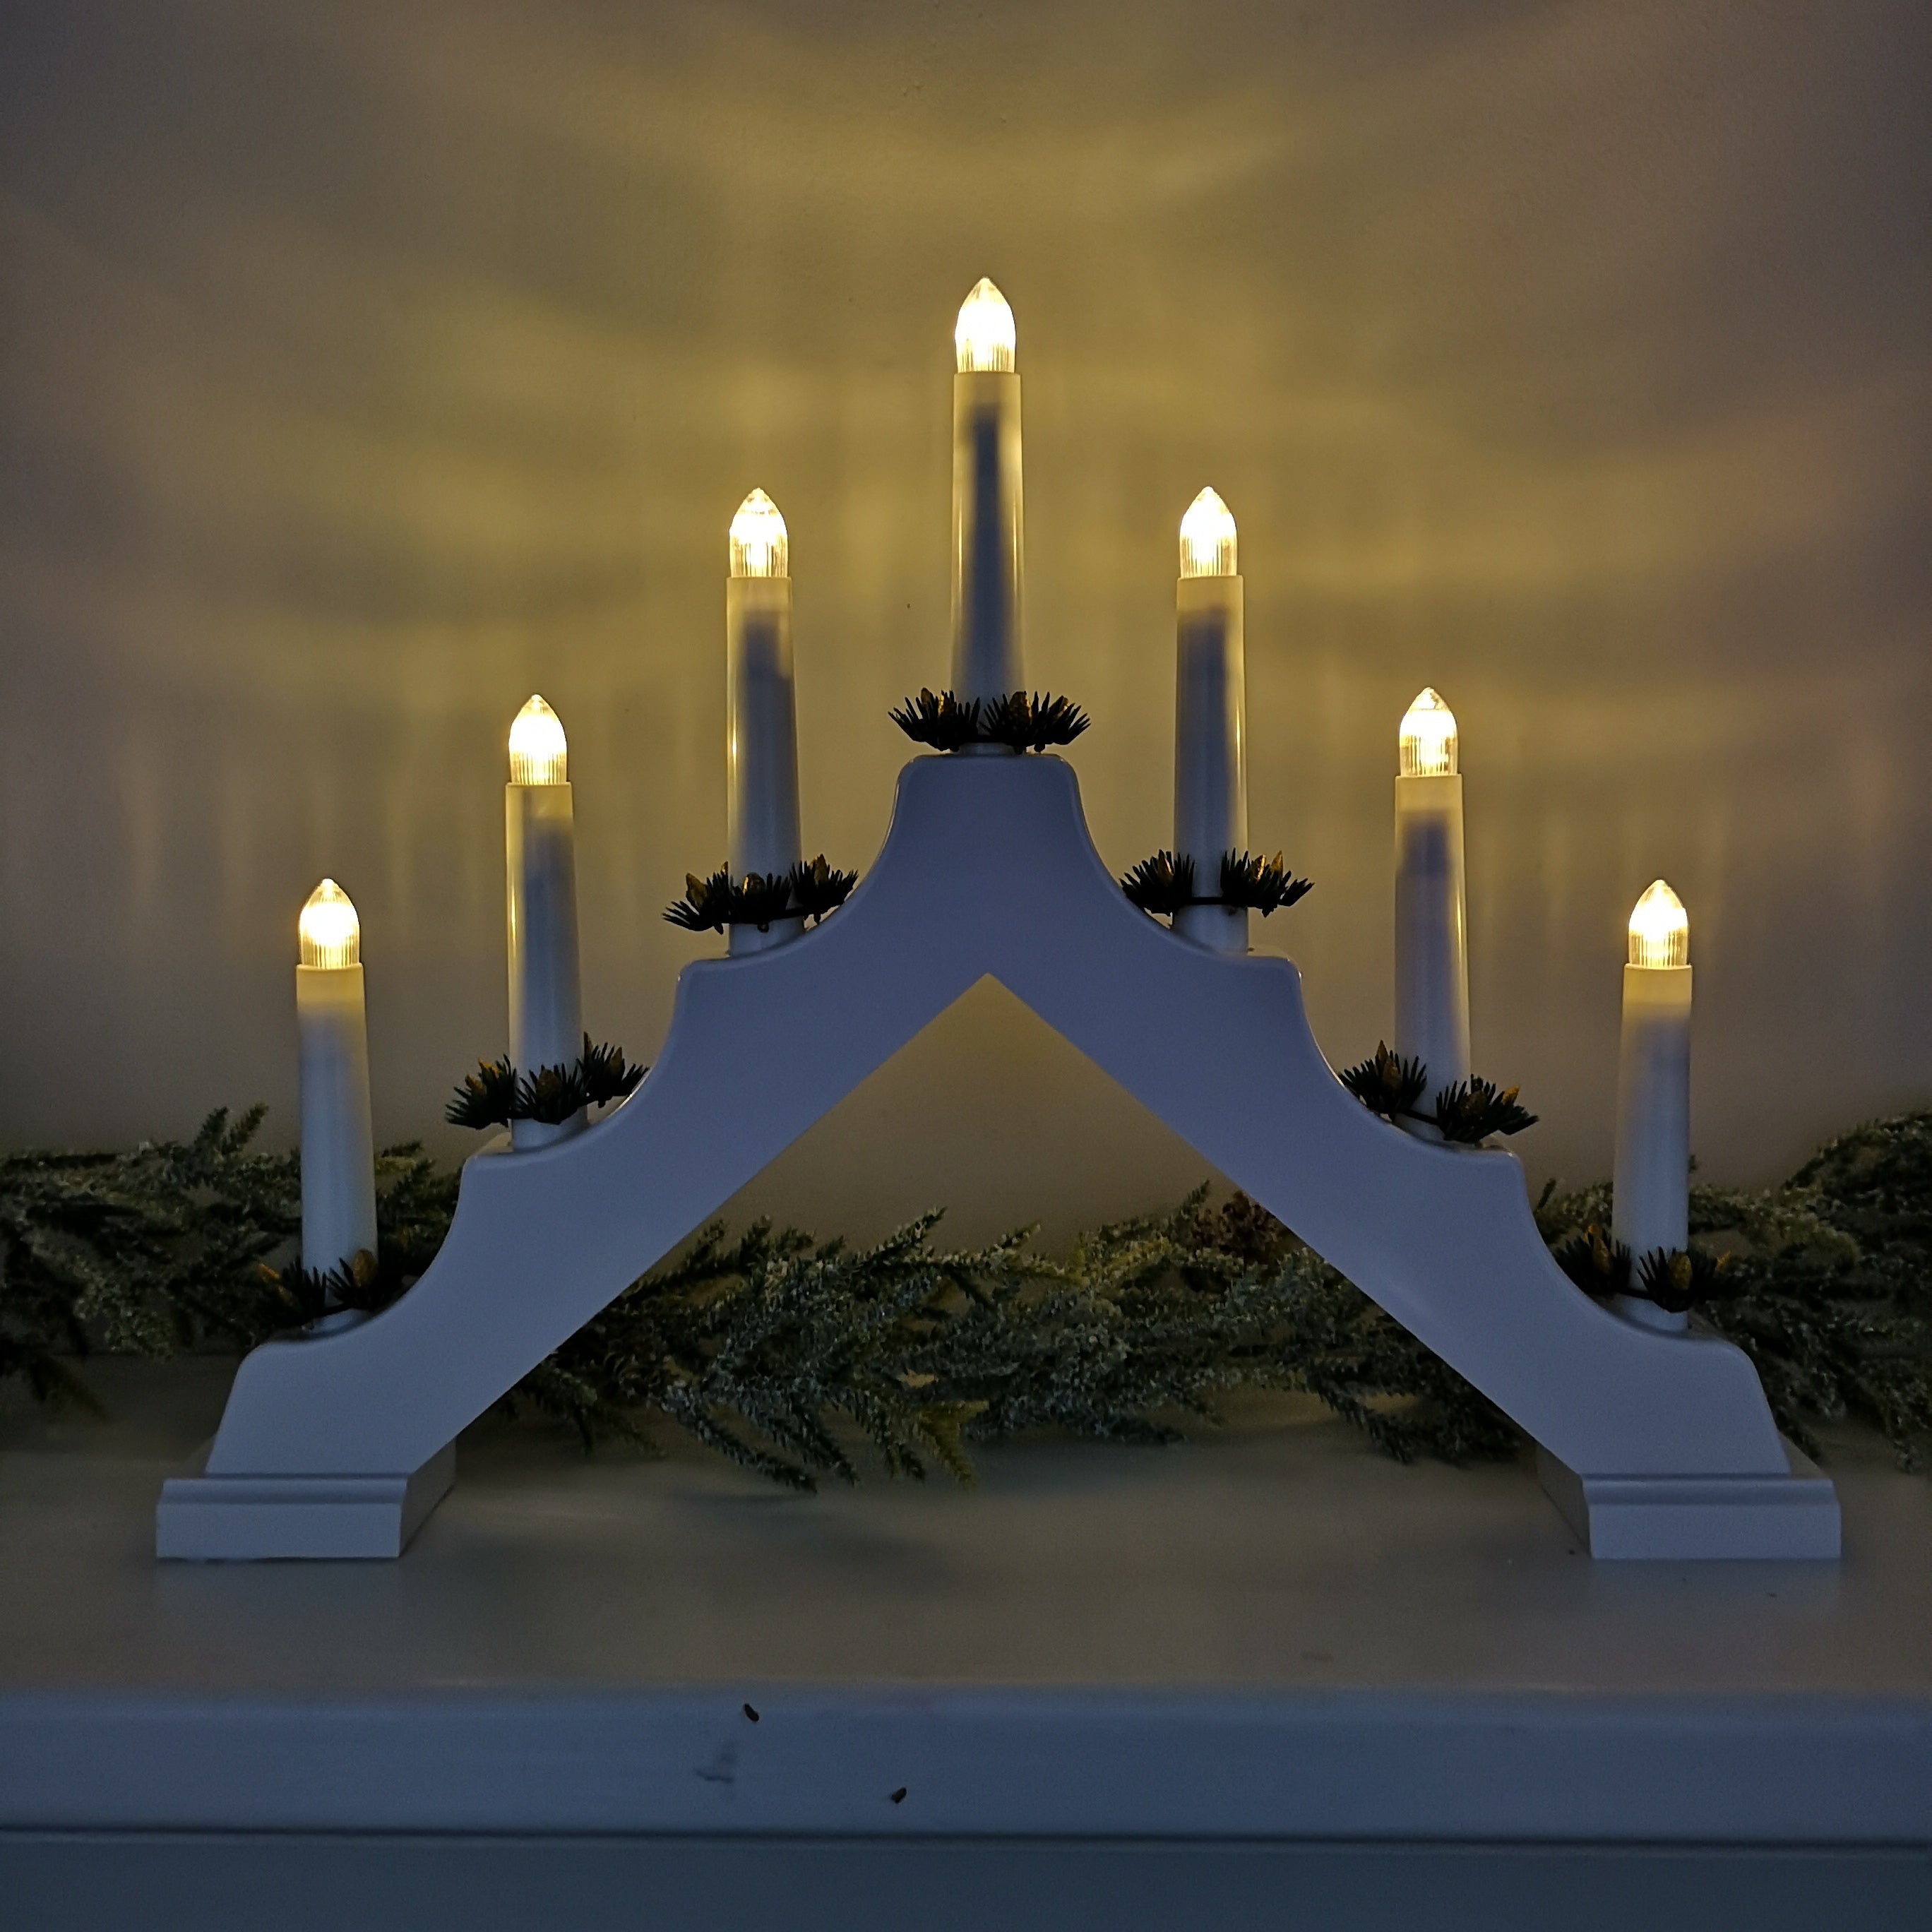 40cm Festive Christmas Candlebridge with 7 Bulbs in White Battery Operated